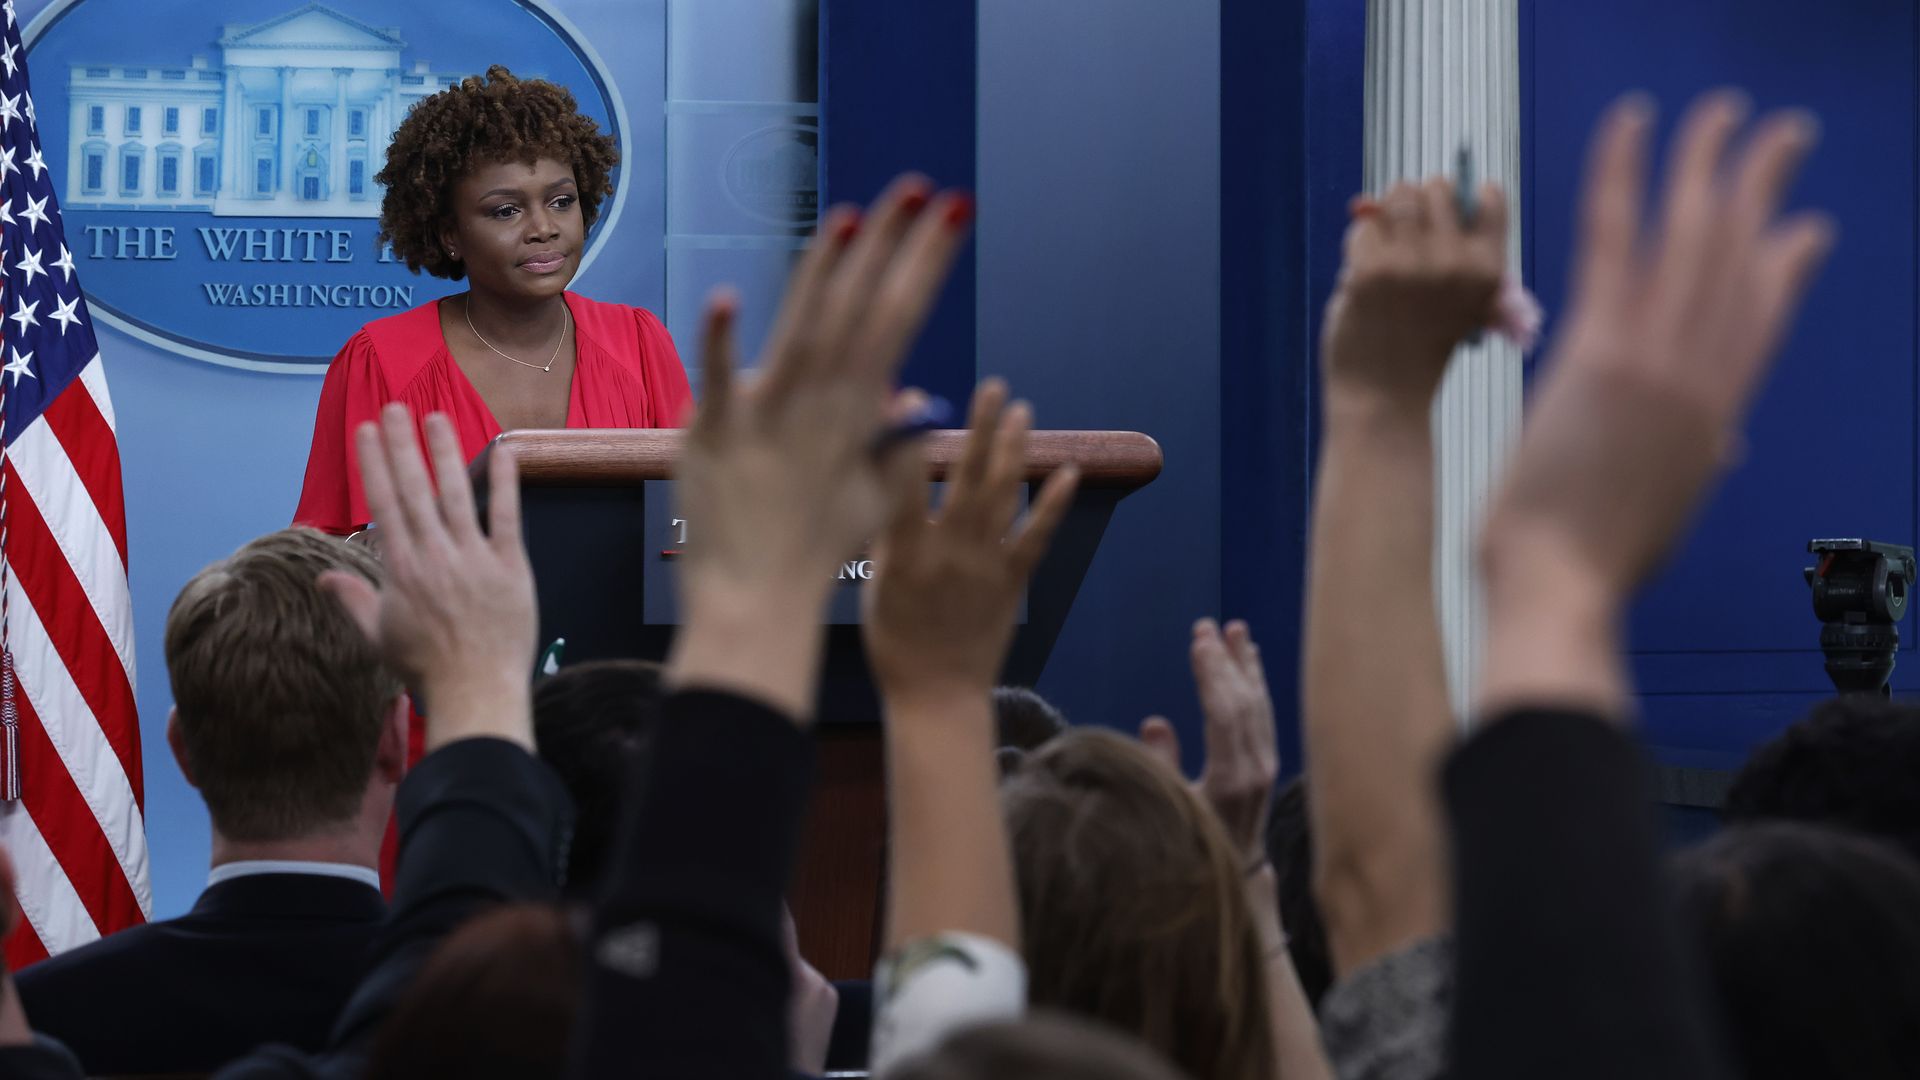 White House press secretary Karine Jean-Pierre is seen answering questions during the first day of her new job.